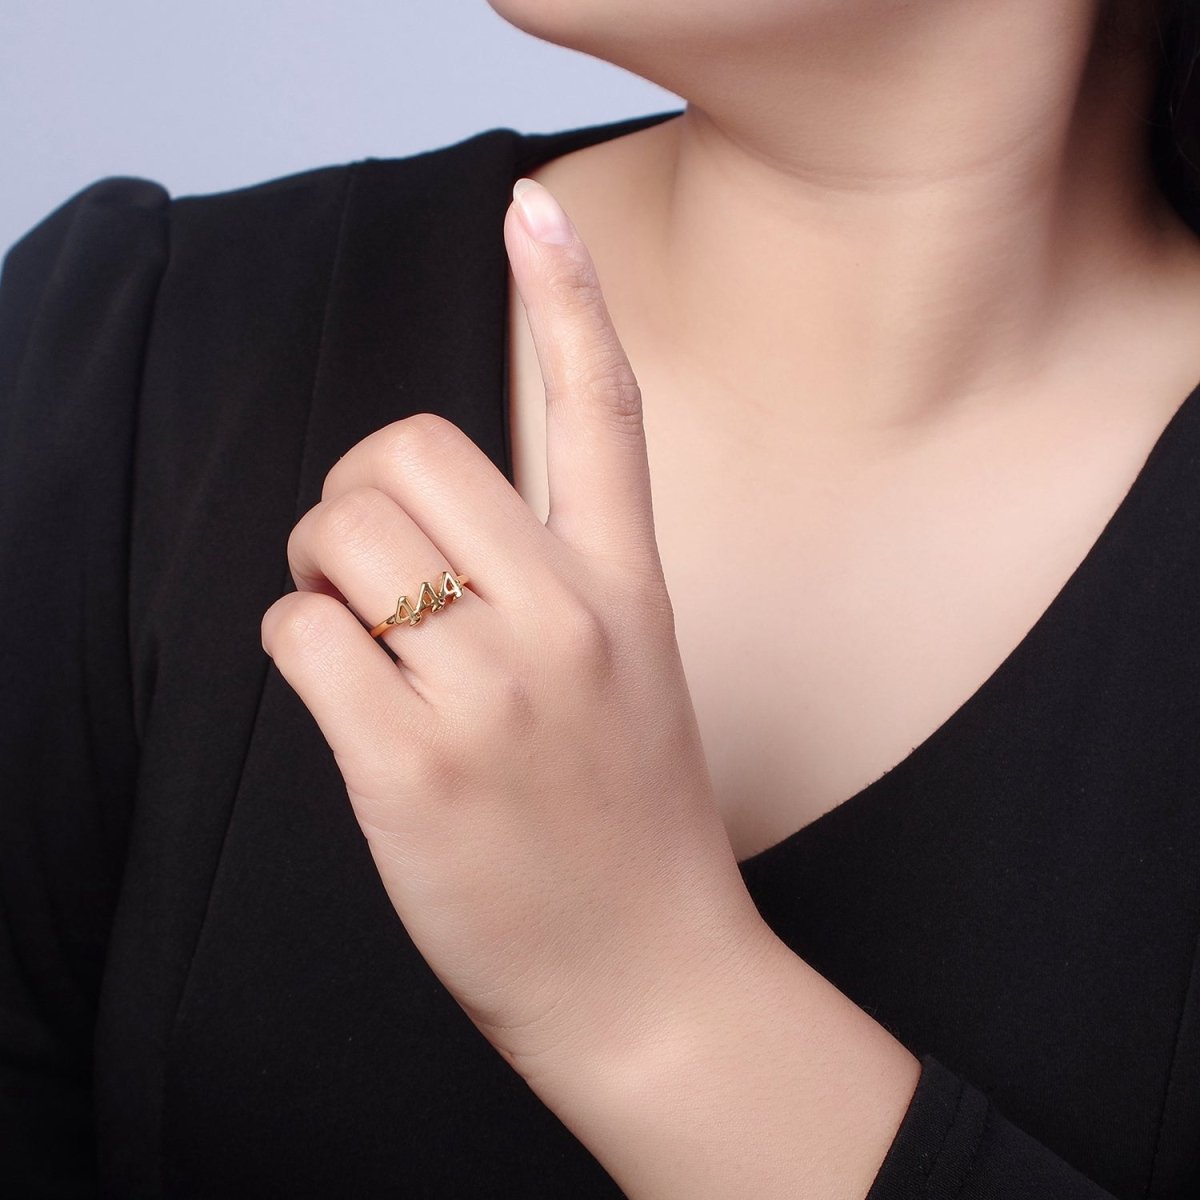 Dainty Angel Number Ring, Minimalist Gold Filled Ring Unisex Personalized Jewelry, Statement Rings O2056-O2064 - DLUXCA